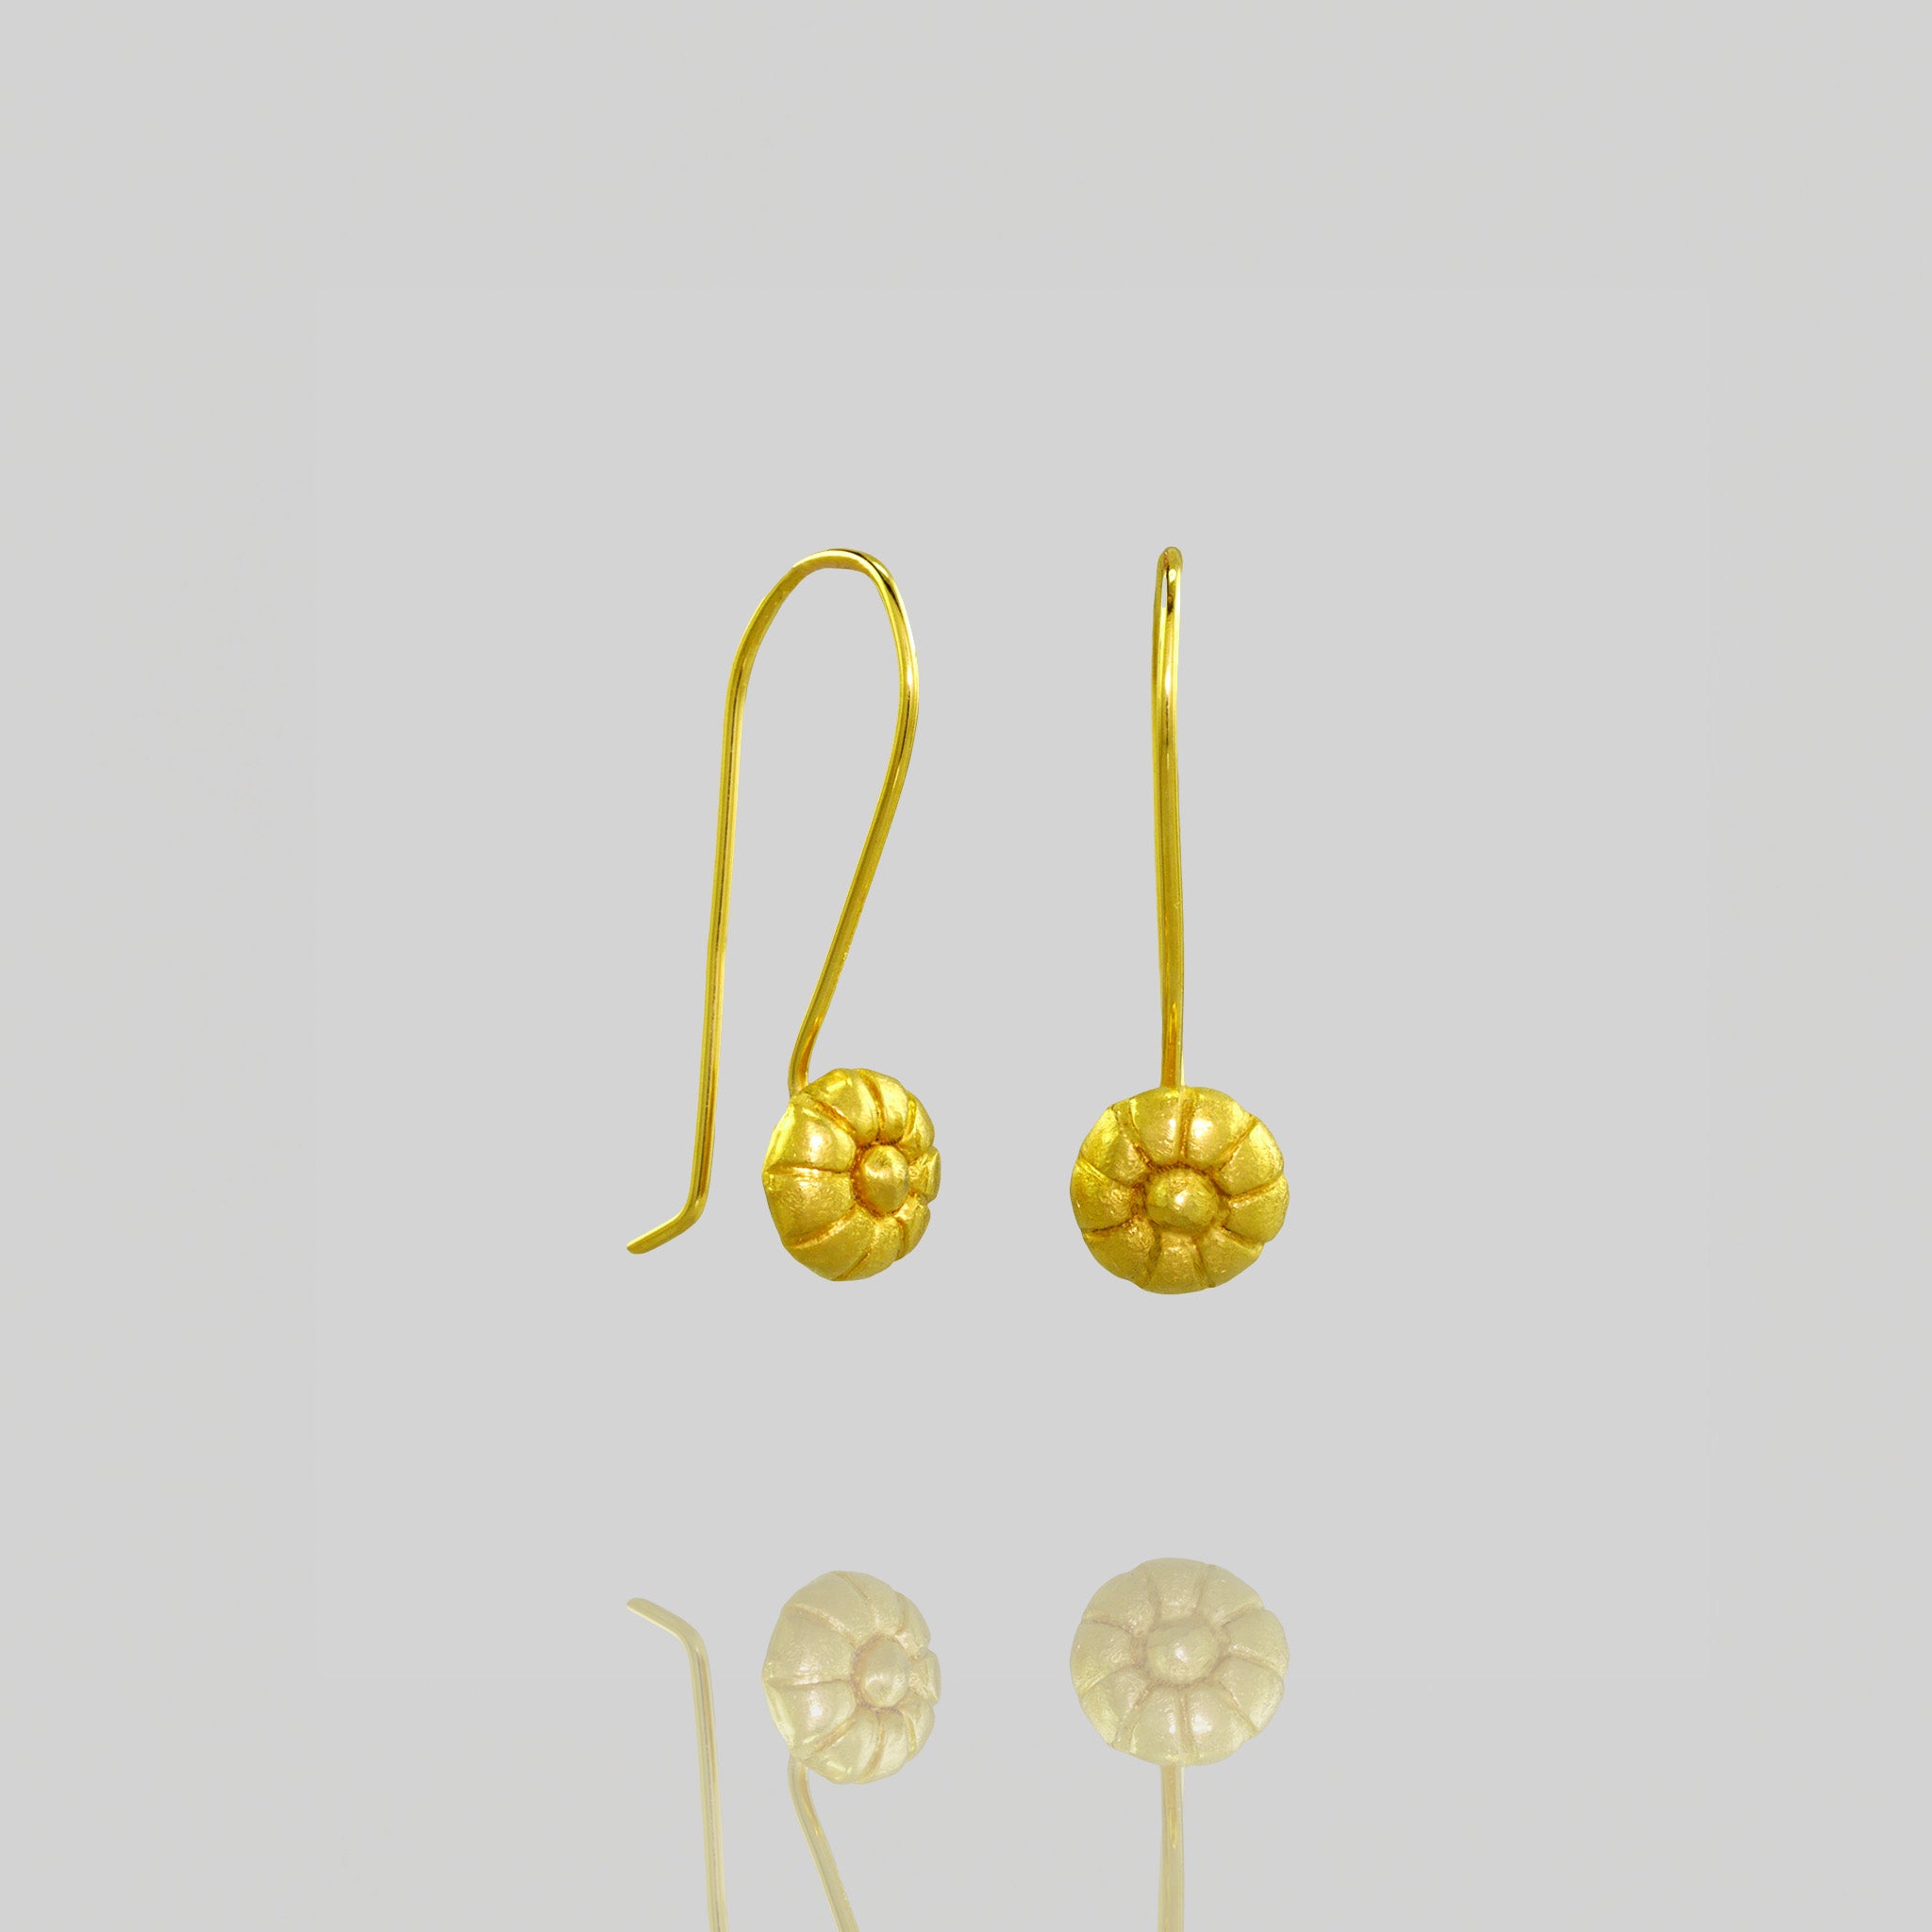 Close up of Mallow Fruit-inspired Gold Drop Earrings with Delicate Beauty